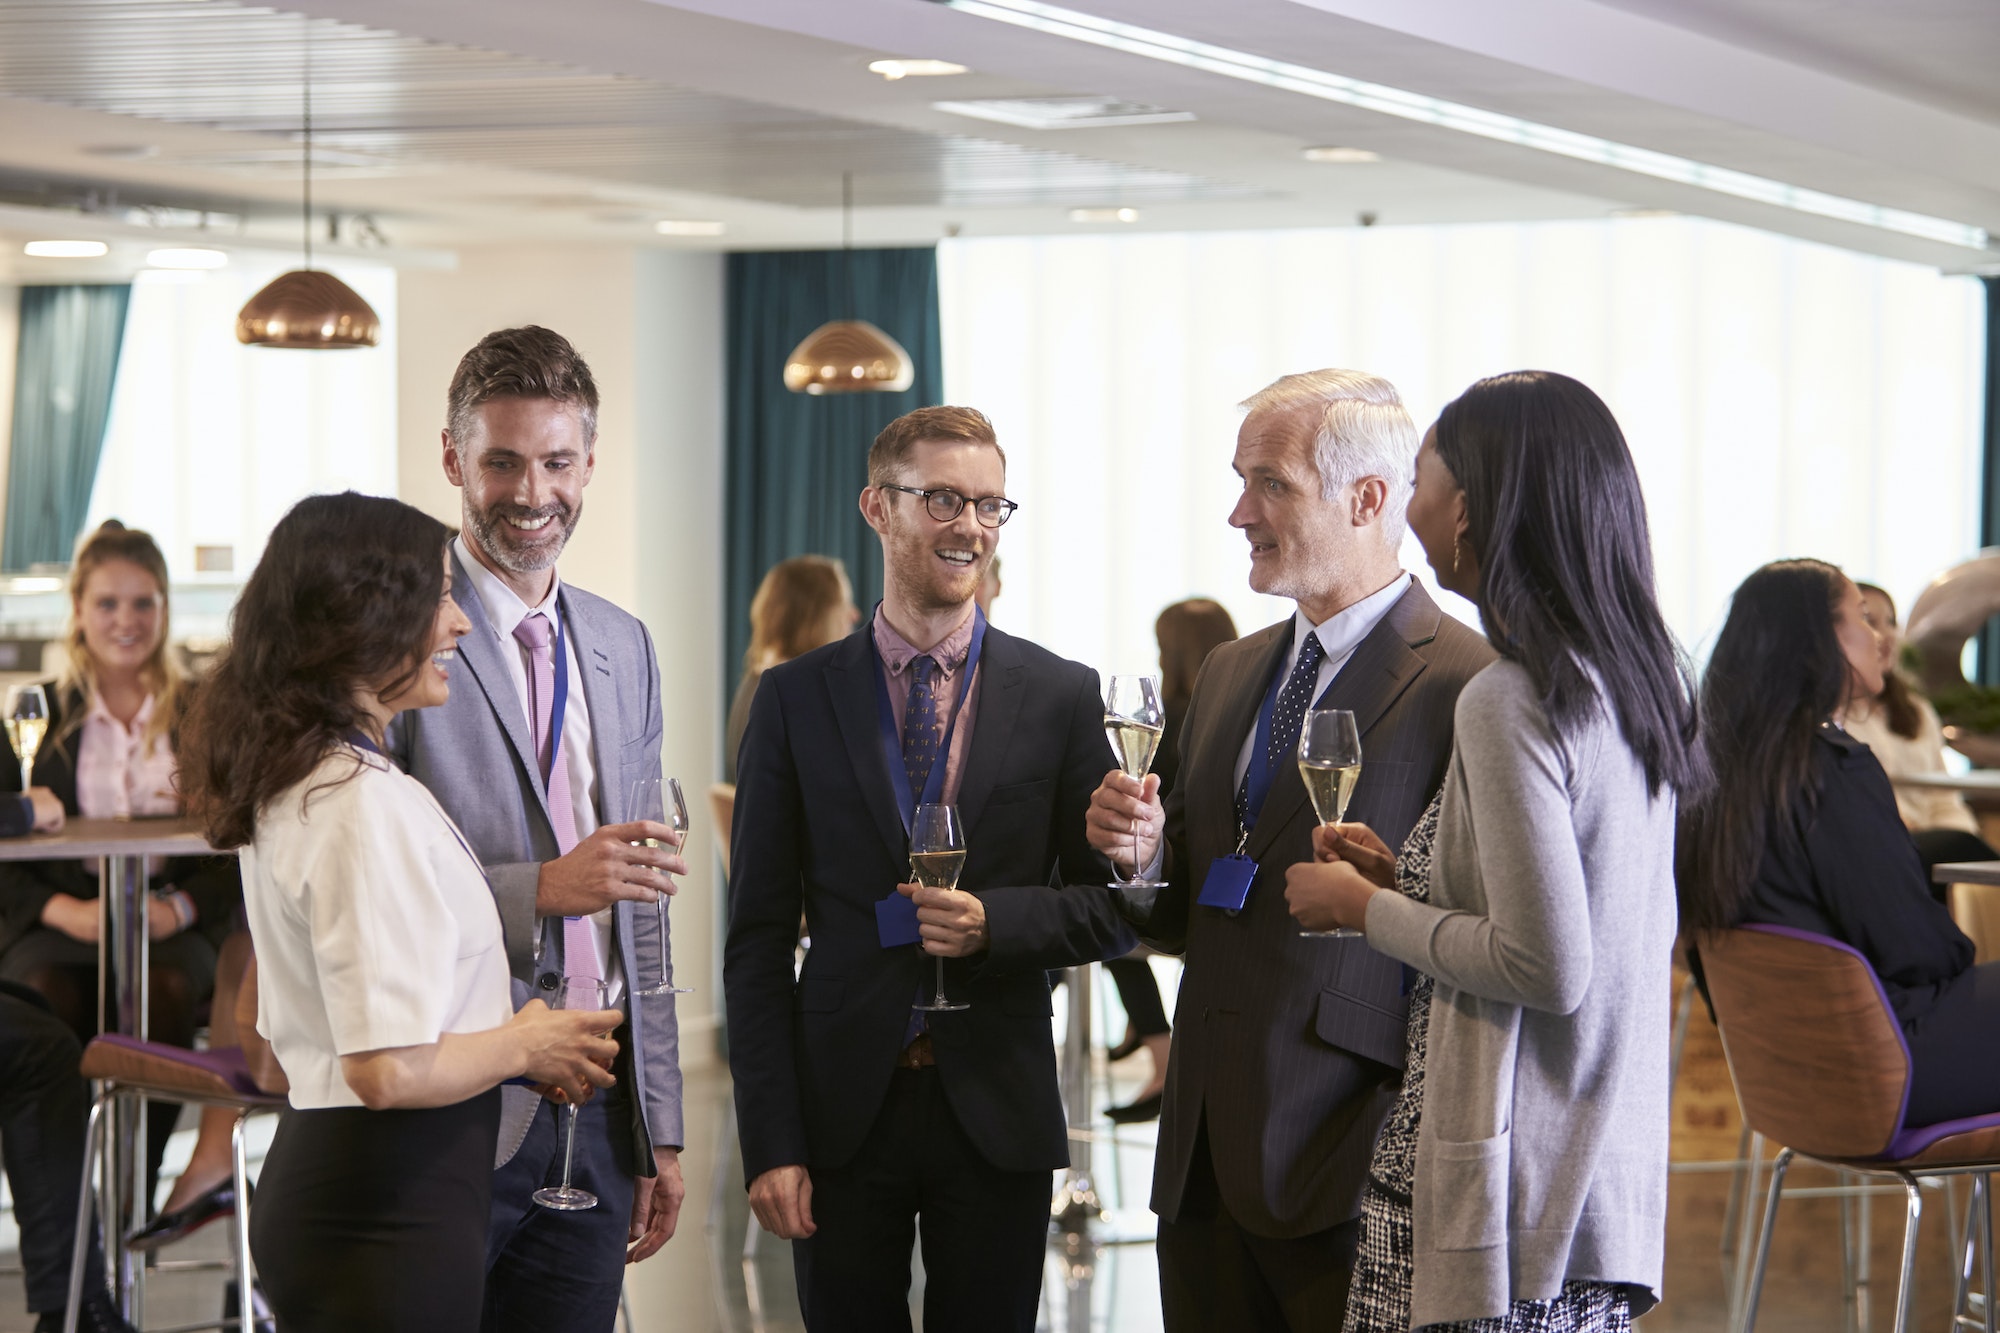 What Are The Benefits of Business Networking?